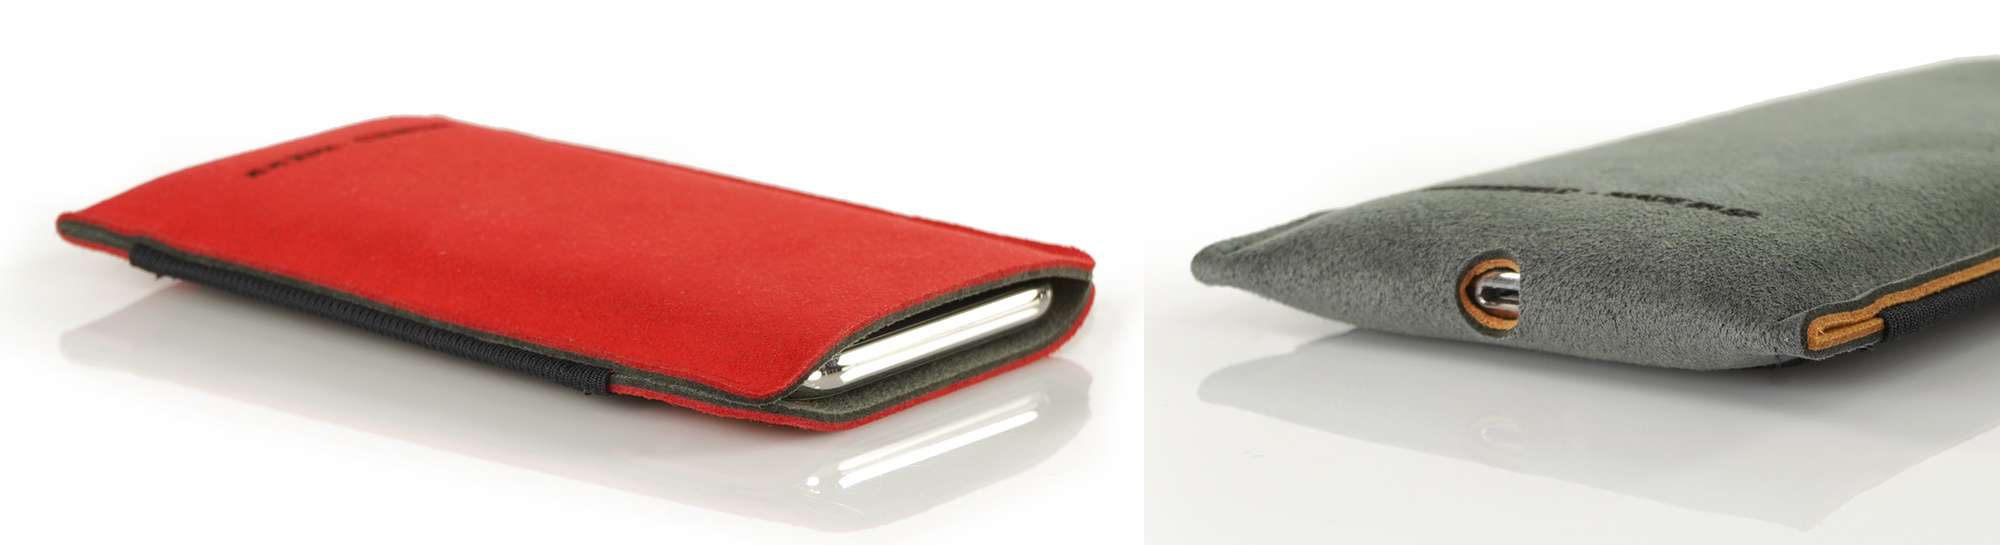 Waterfield's new Fused Suede Case looks as good as you'd expect.